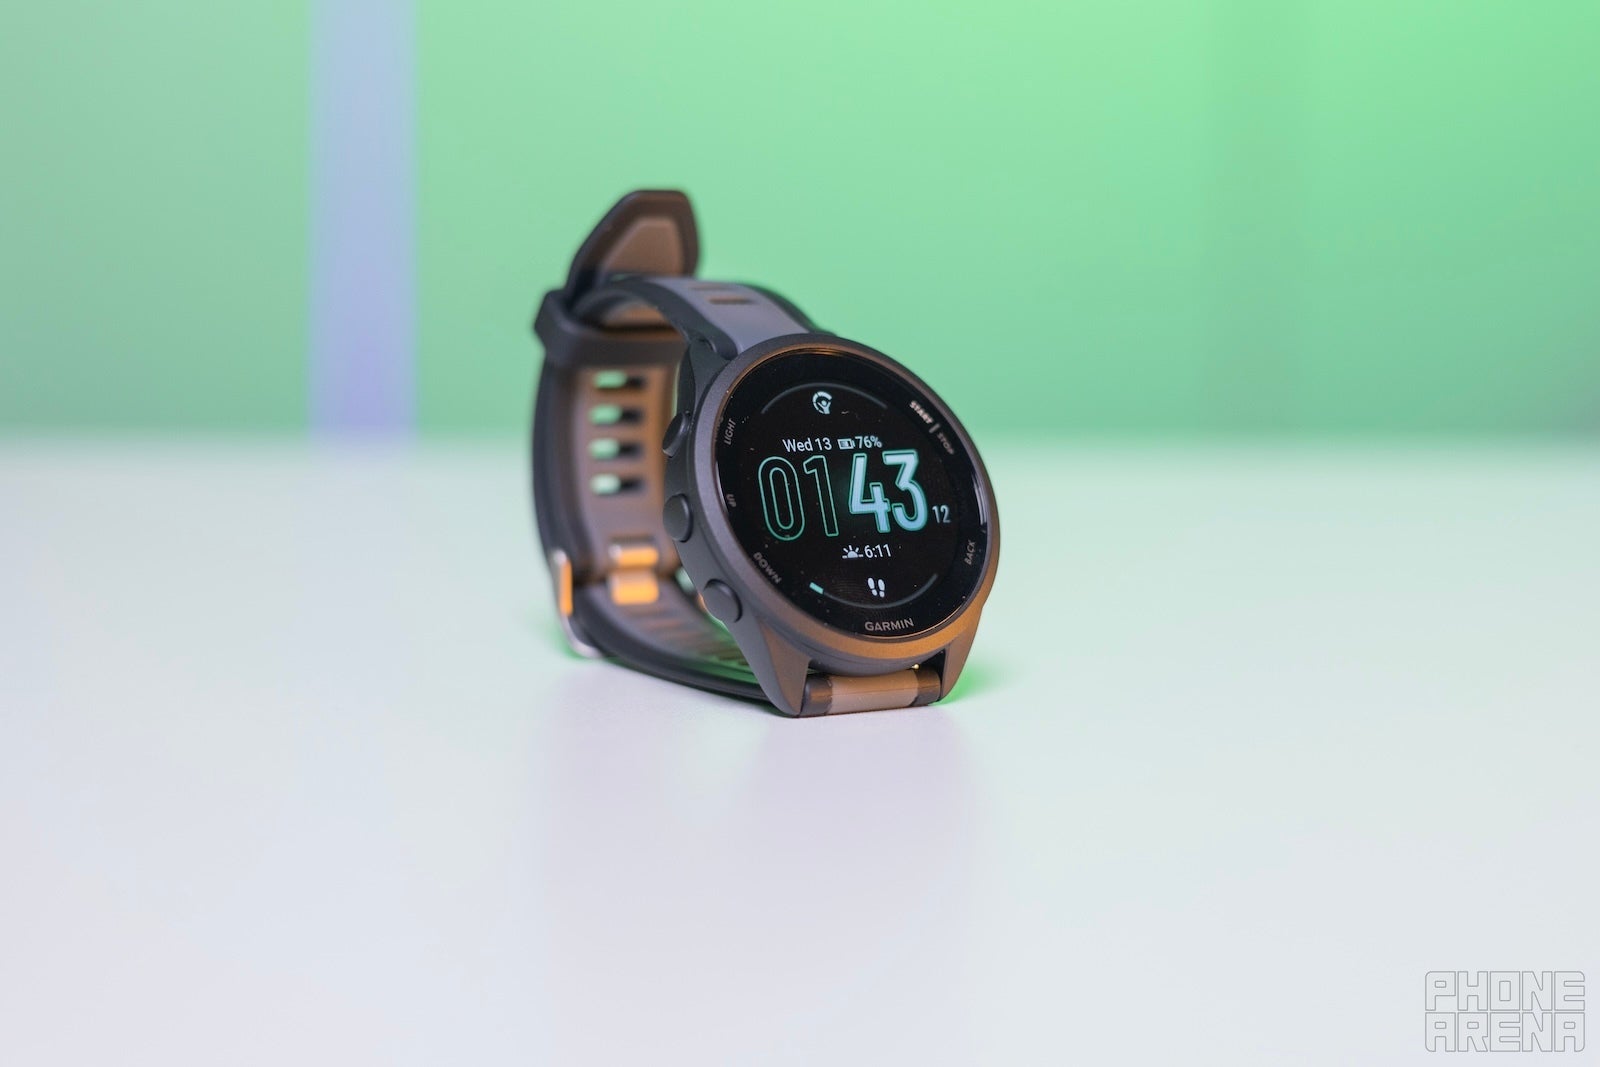 The Forerunner 165 is made of plastic and has a flat screen (Image by PhoneArena) - Garmin Forerunner 165 Review: The new default Garmin sports watch